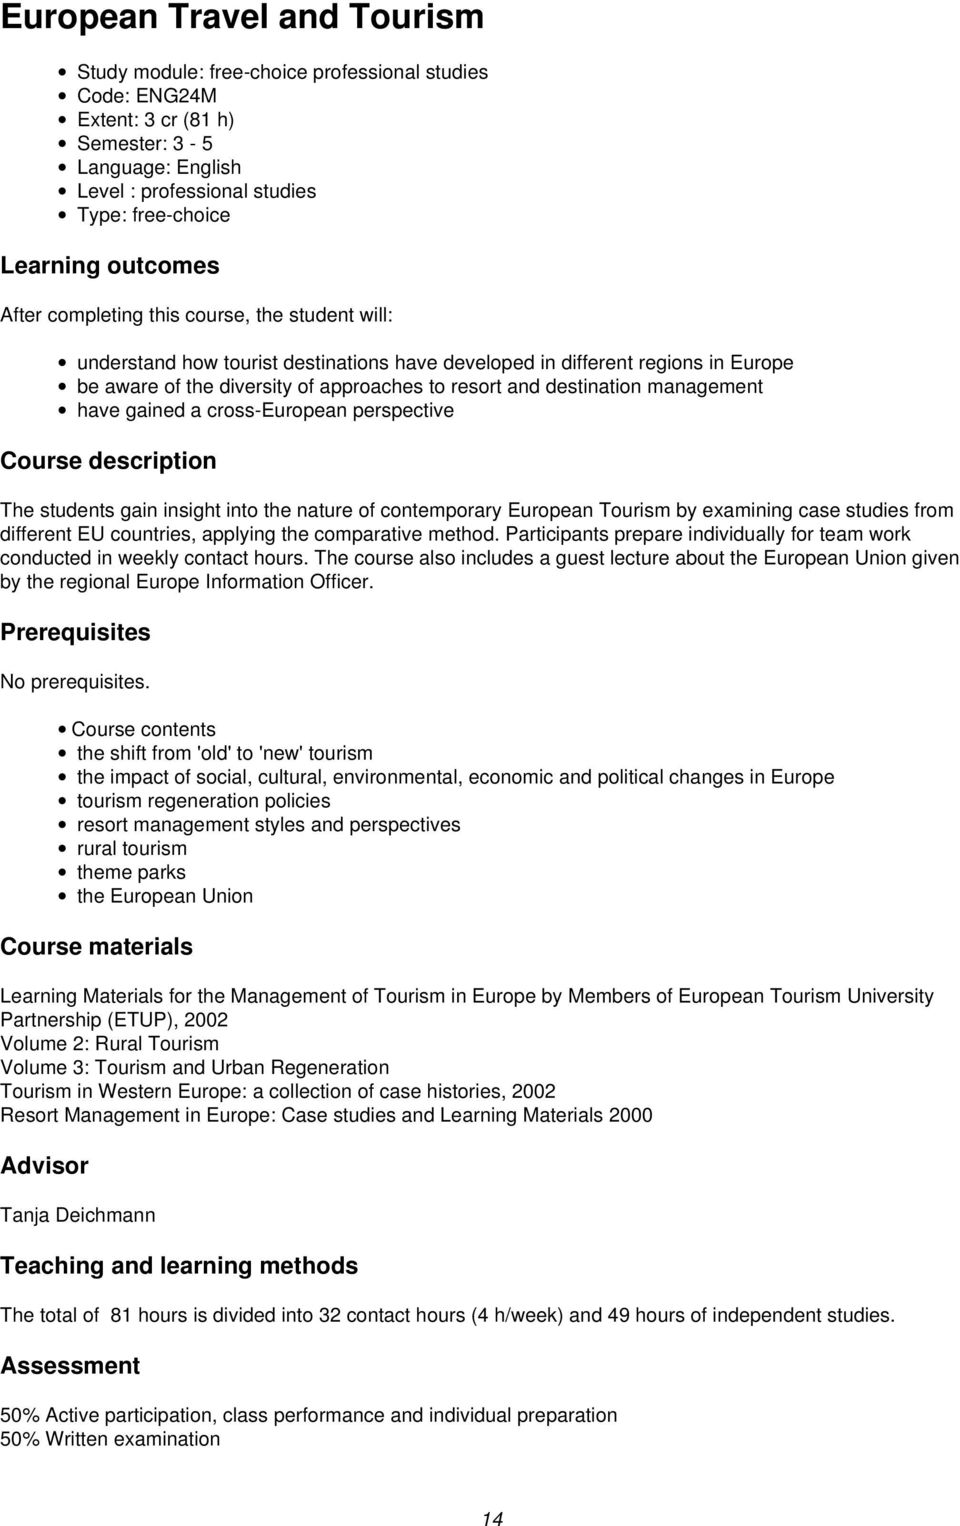 destination management have gained a cross-european perspective Course description The students gain insight into the nature of contemporary European Tourism by examining case studies from different